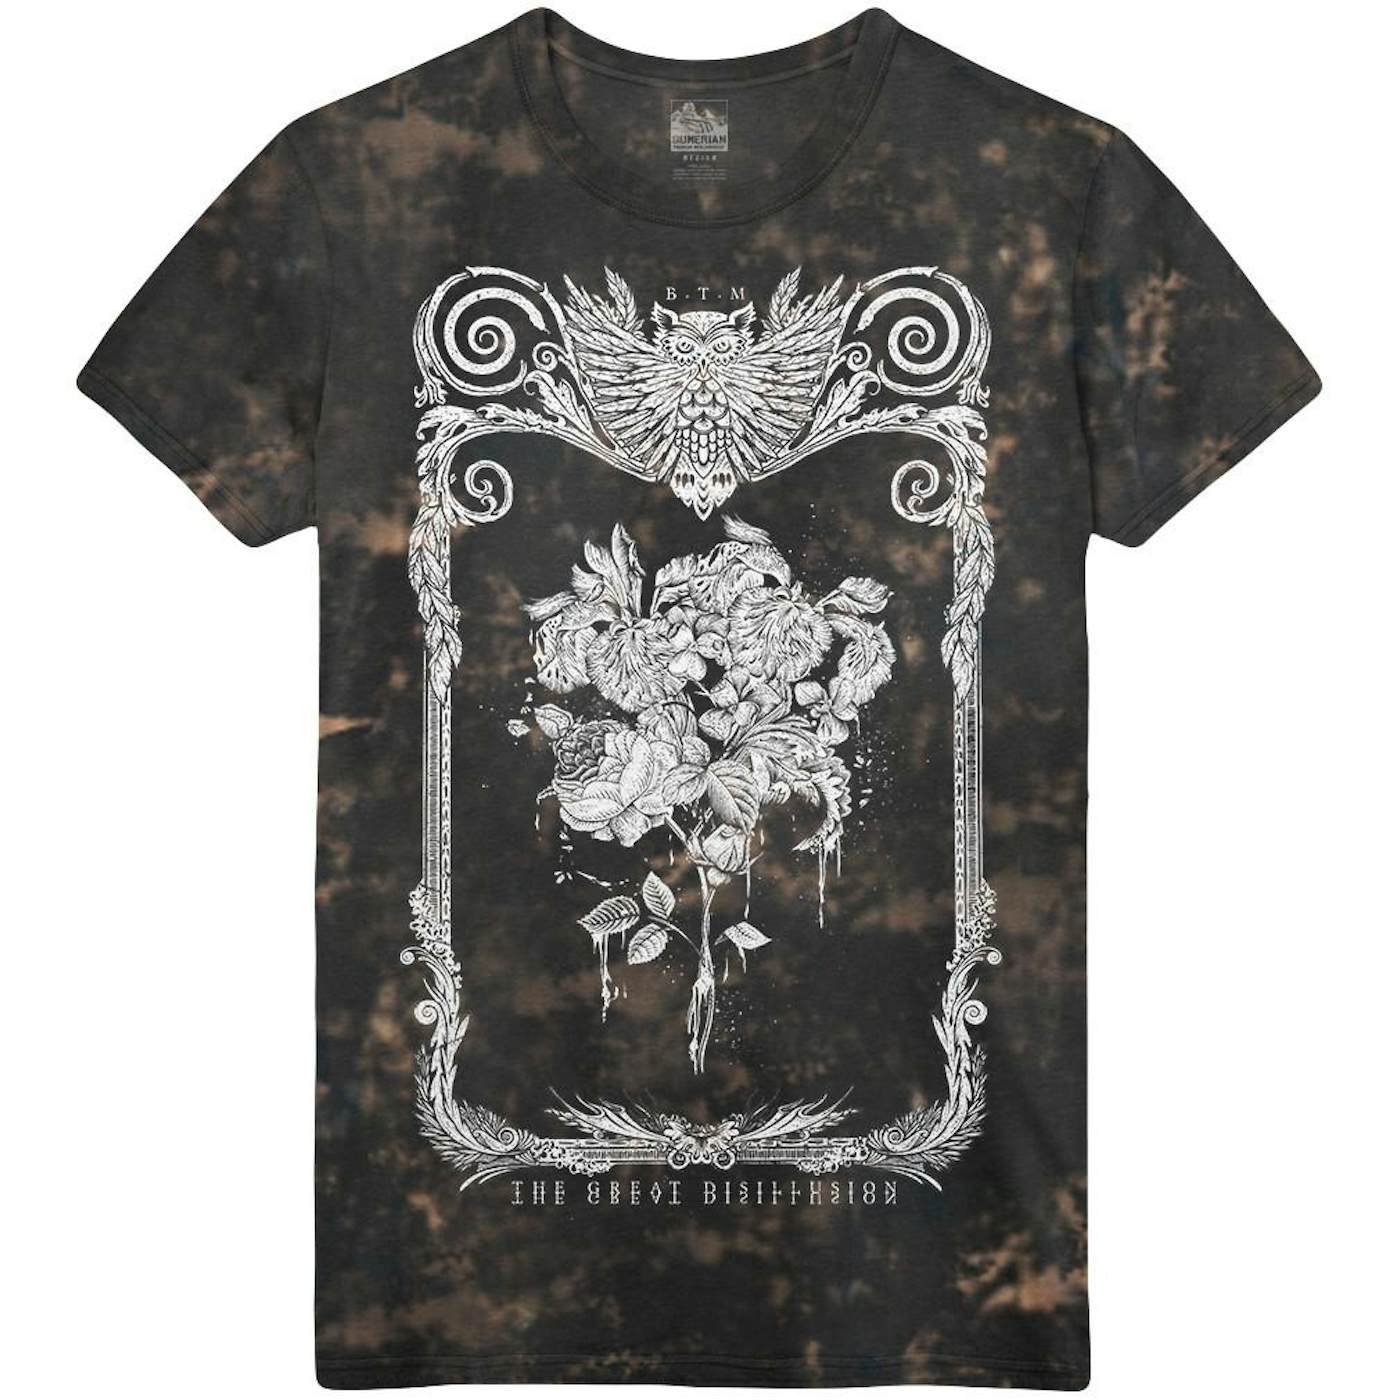 Betraying The Martyrs - The Great Disillusion Acid Wash Tee